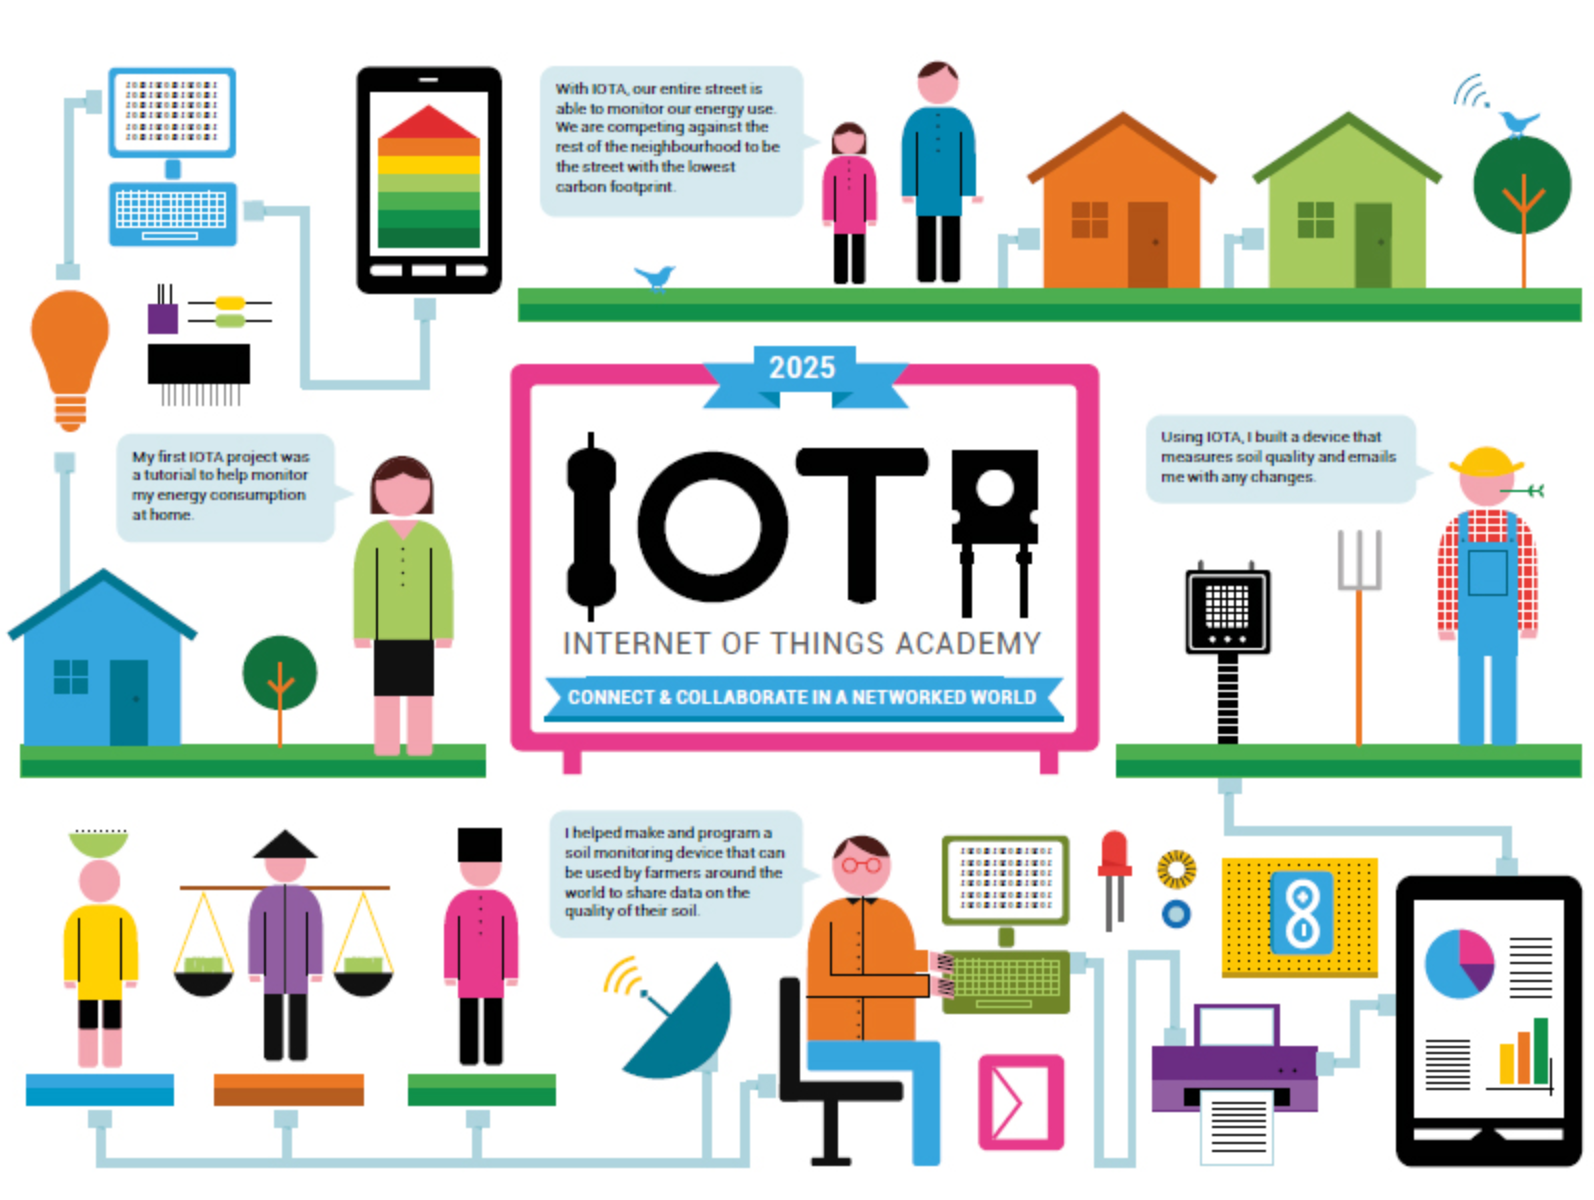 Why We Keep Hearing About “Internet of Things”